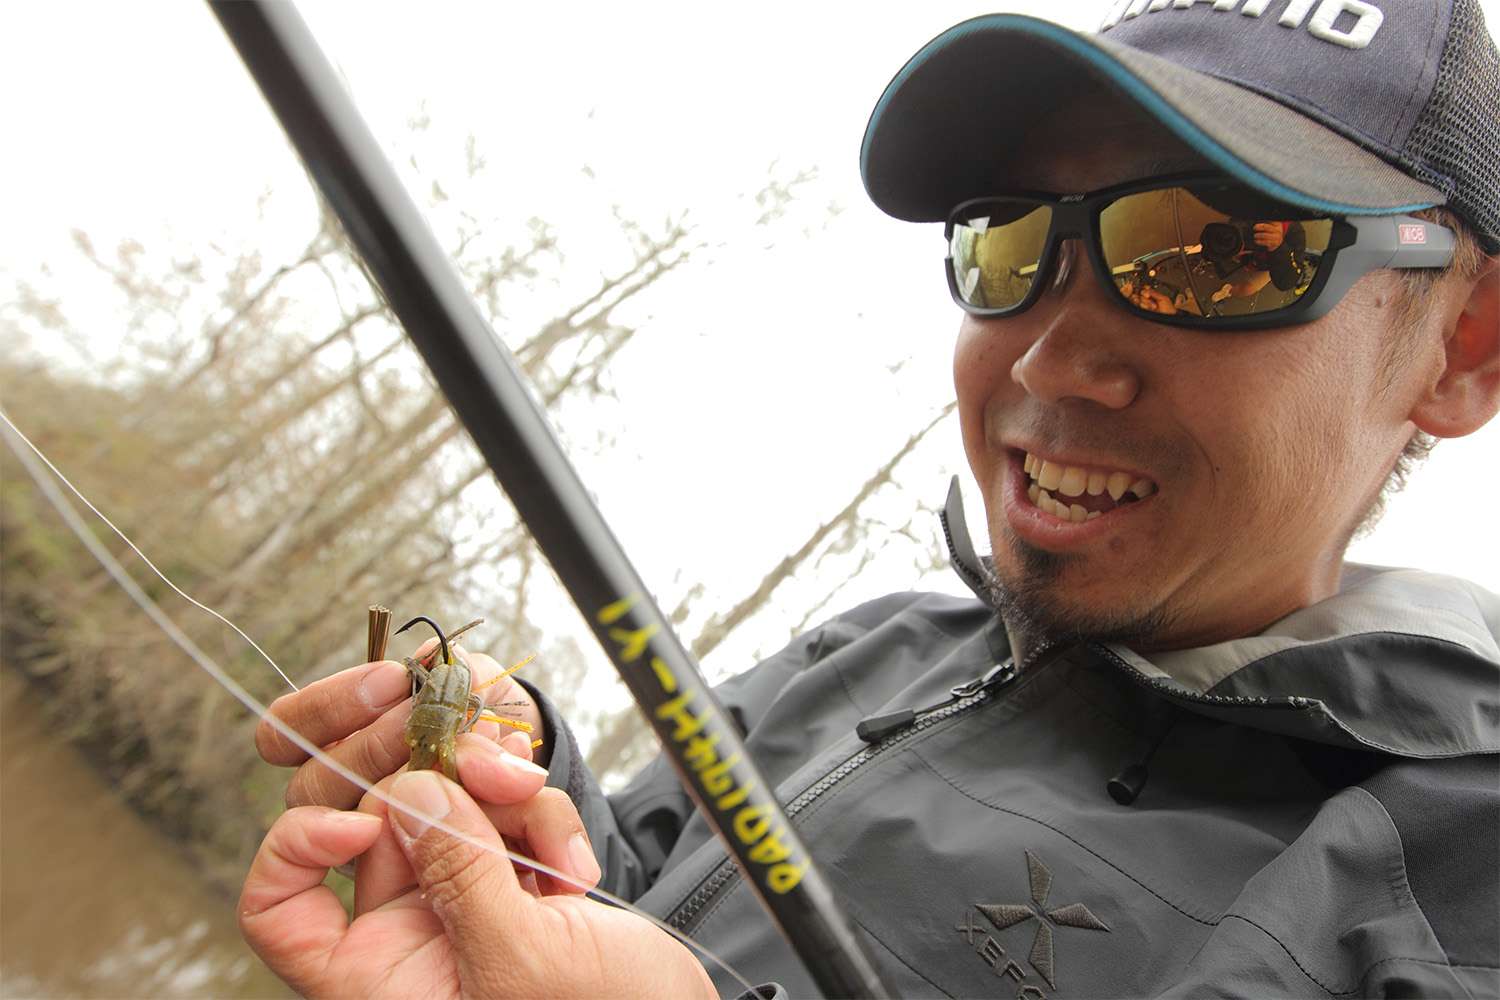 After another bite, he showed that a bass had nibbled the Gary Yamamoto Craw.